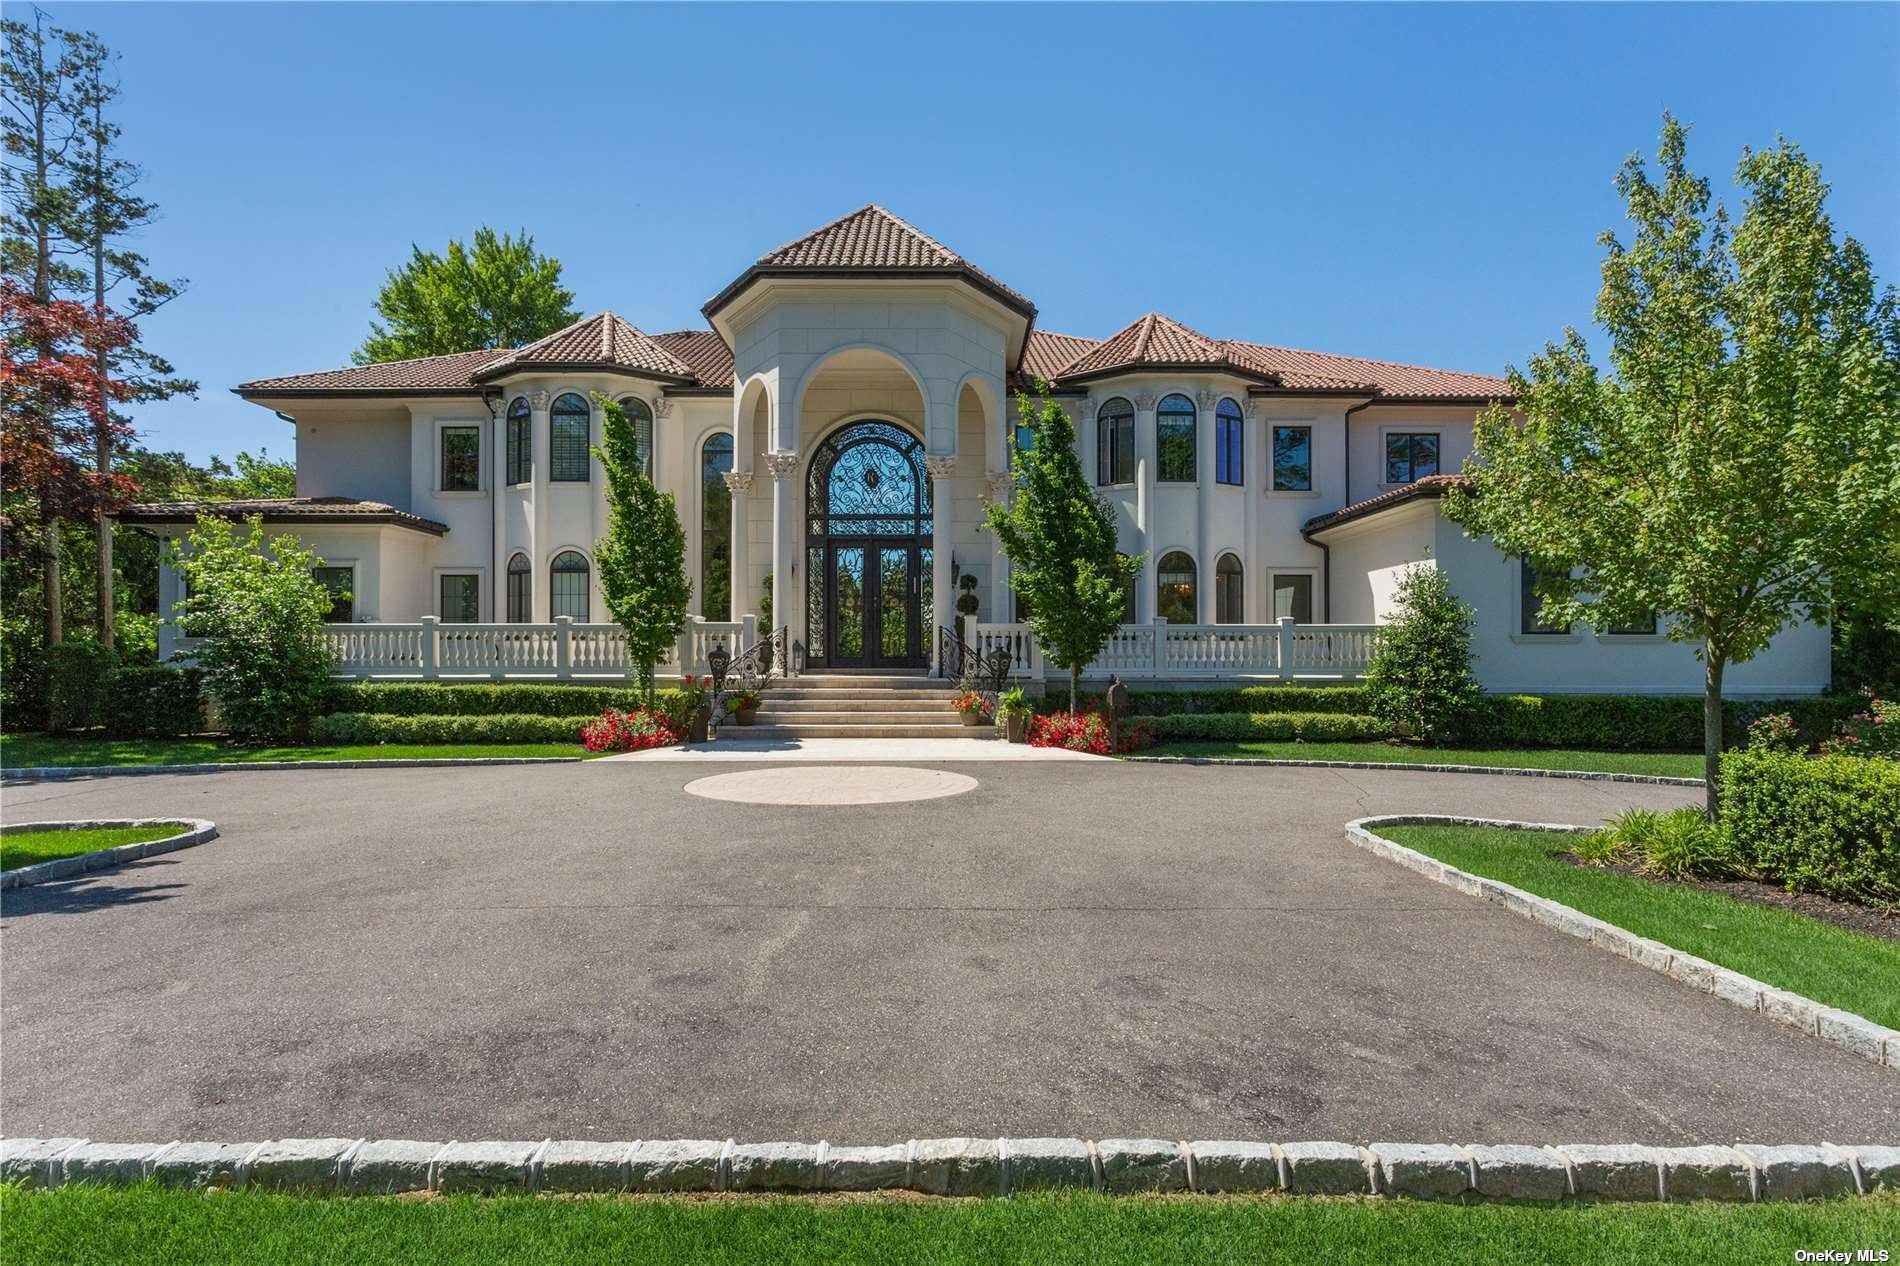 Spectacular mansion in the Heart of Hewlett Harbor.